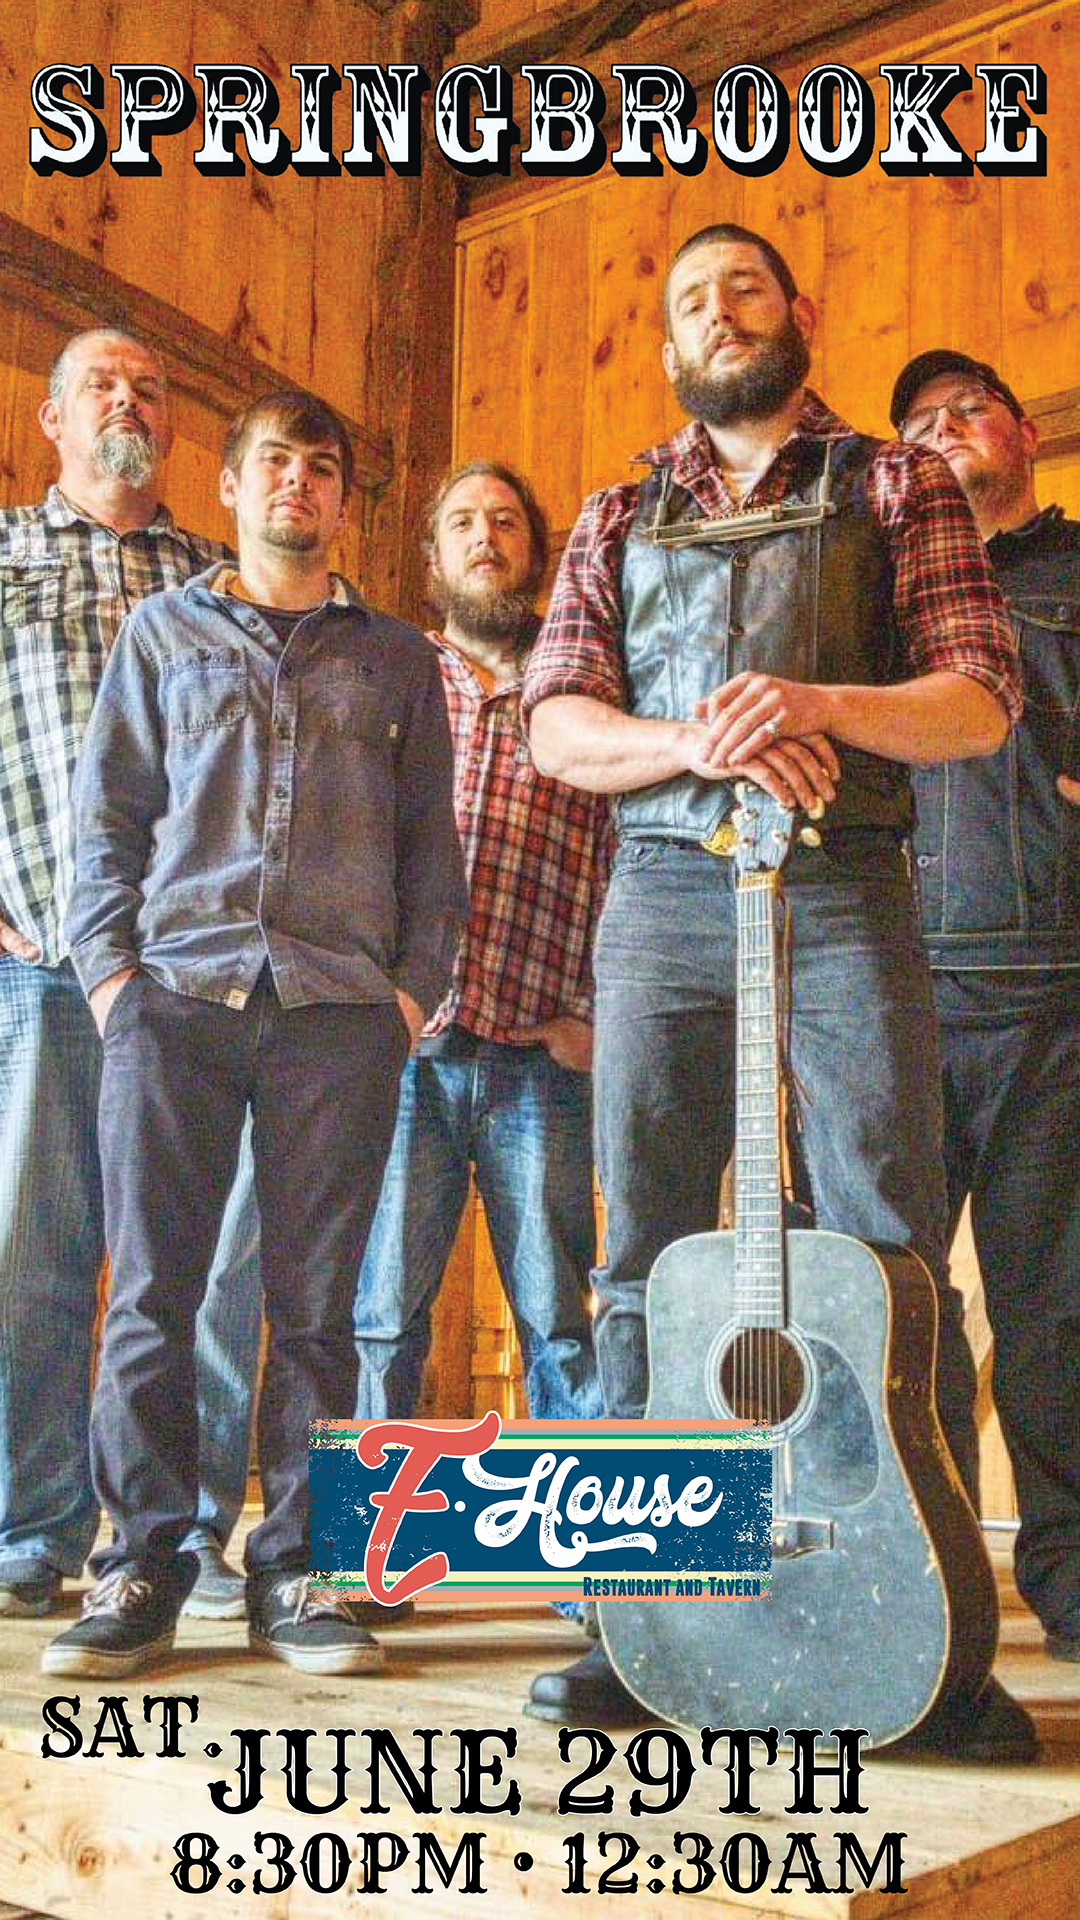 Band "Springbrooke" standing in front of a wooden background; one member is holding a guitar. Event details: Saturday, June 29th, 8:30PM to 12:30AM at Z House Restaurant and Tavern.